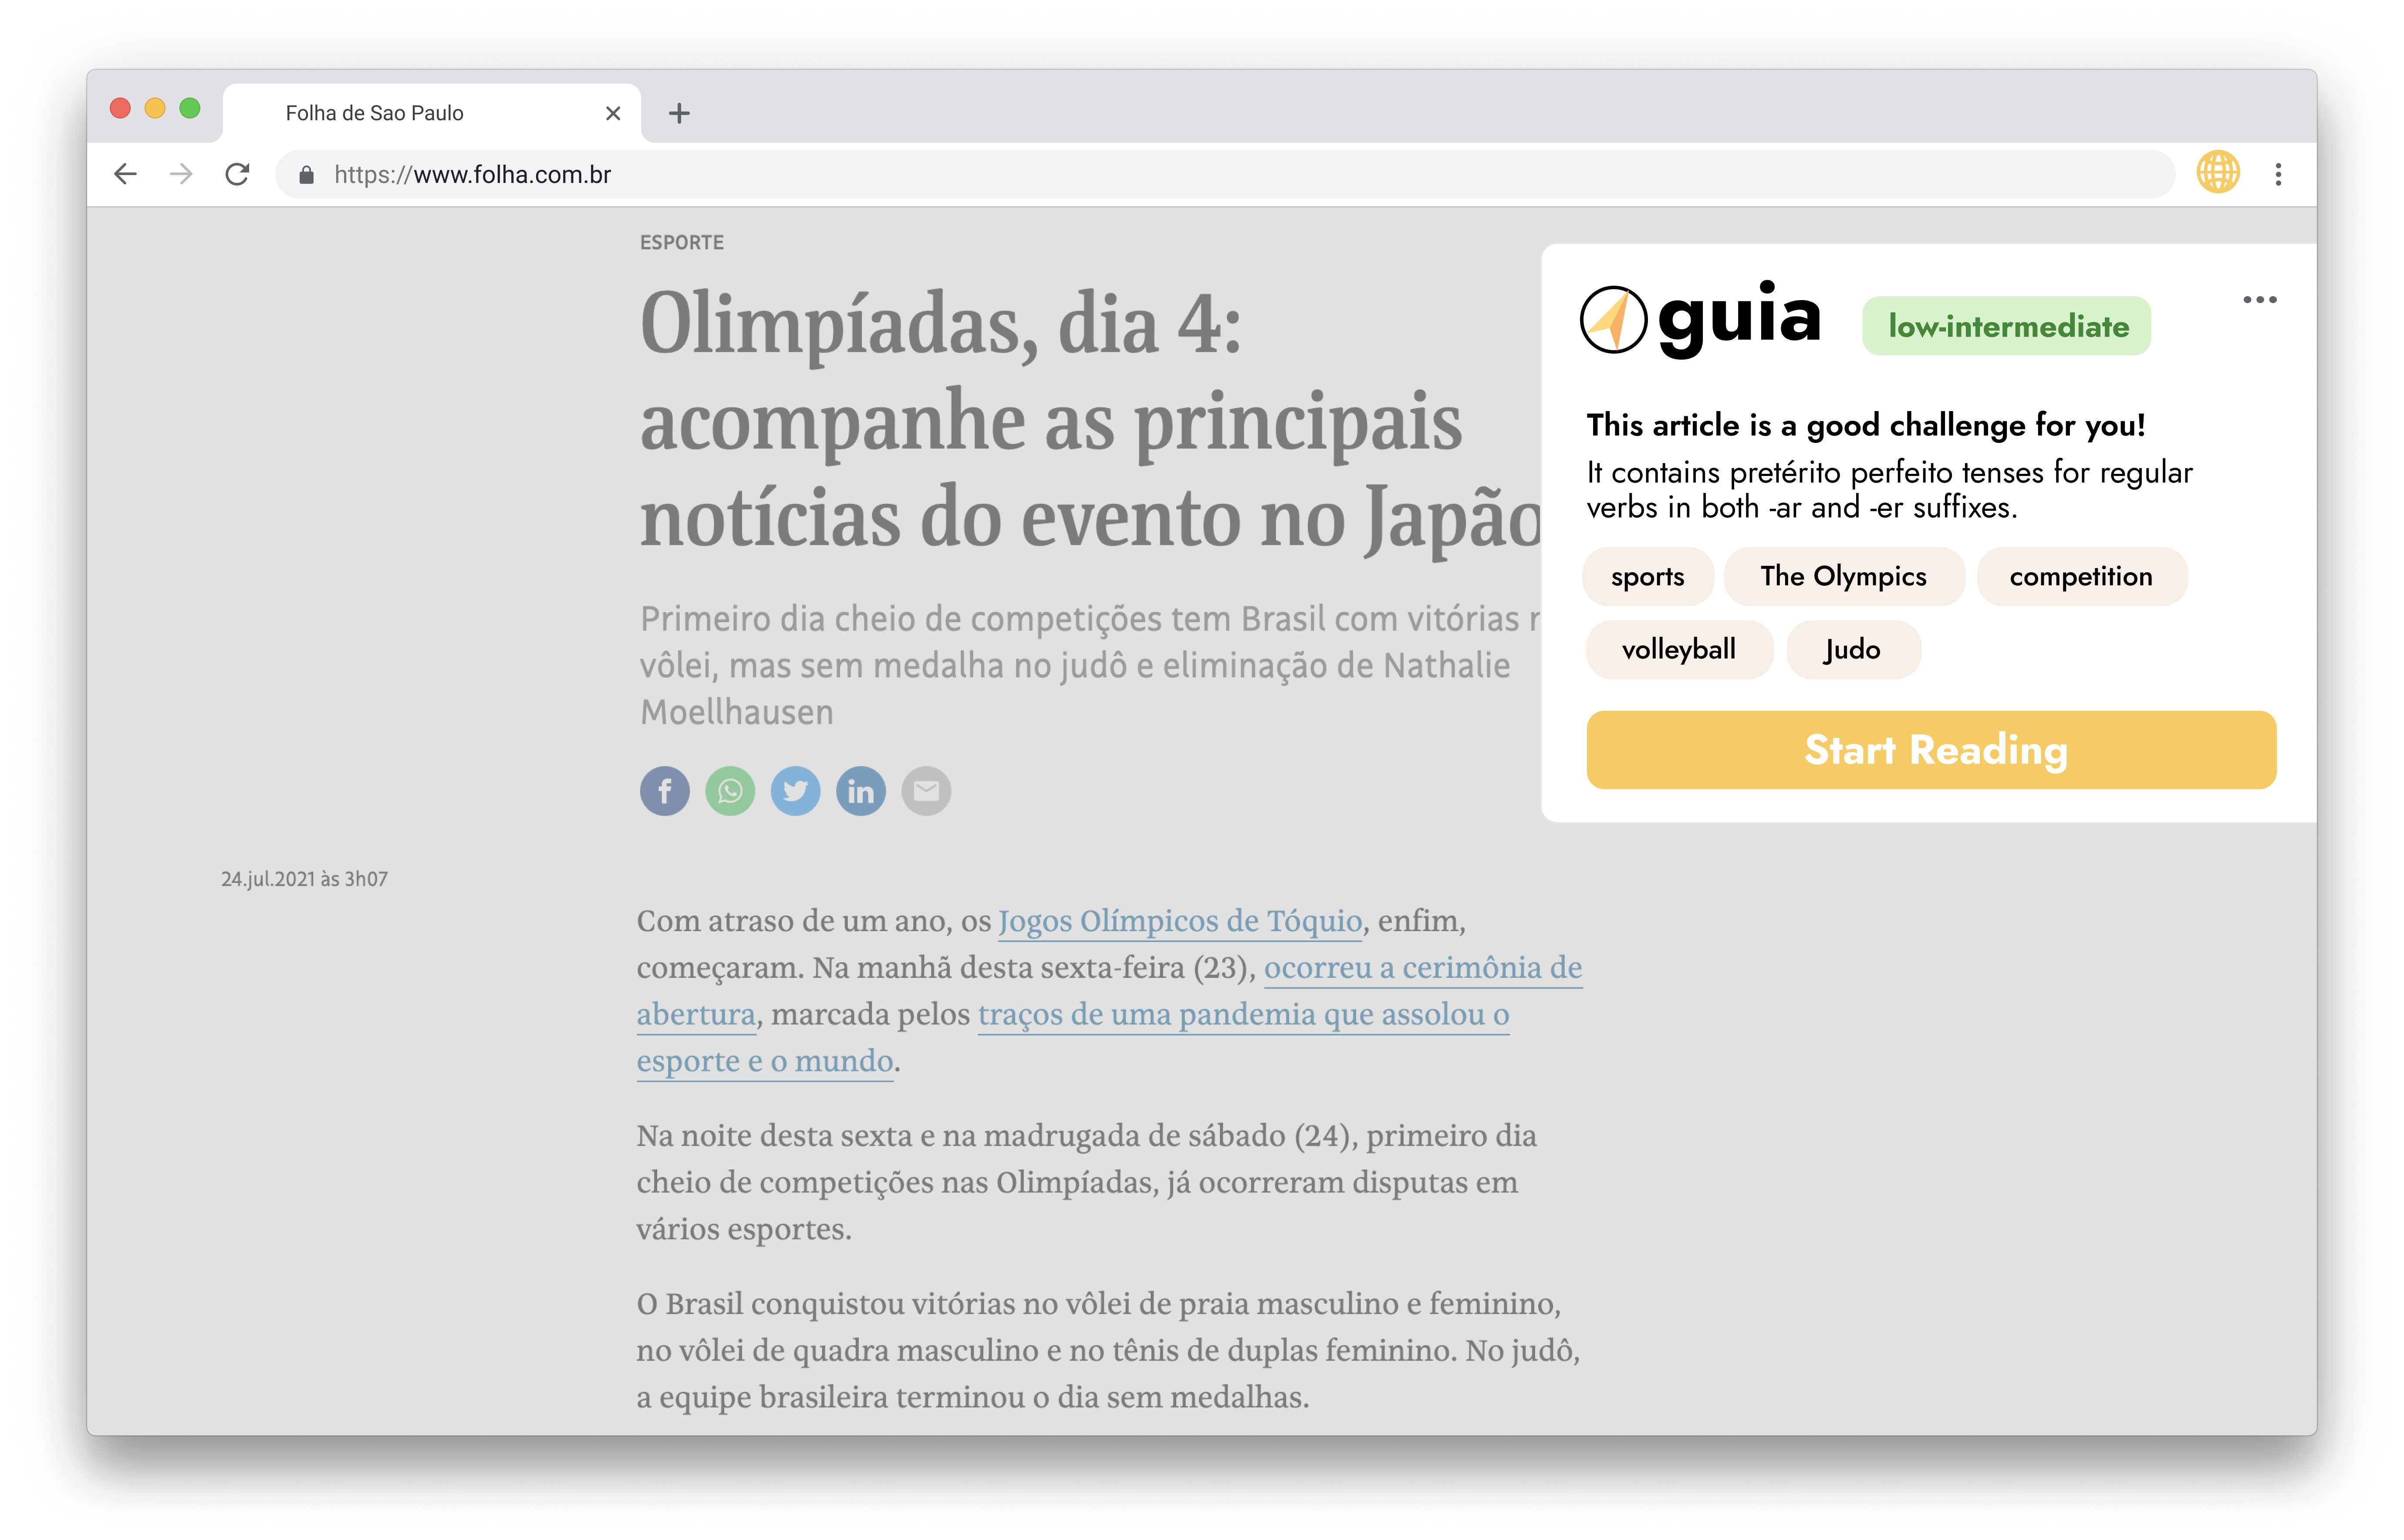 A pop-up window indicating that a Portuguese article is at the appropriate difficulty and interest level for this student.